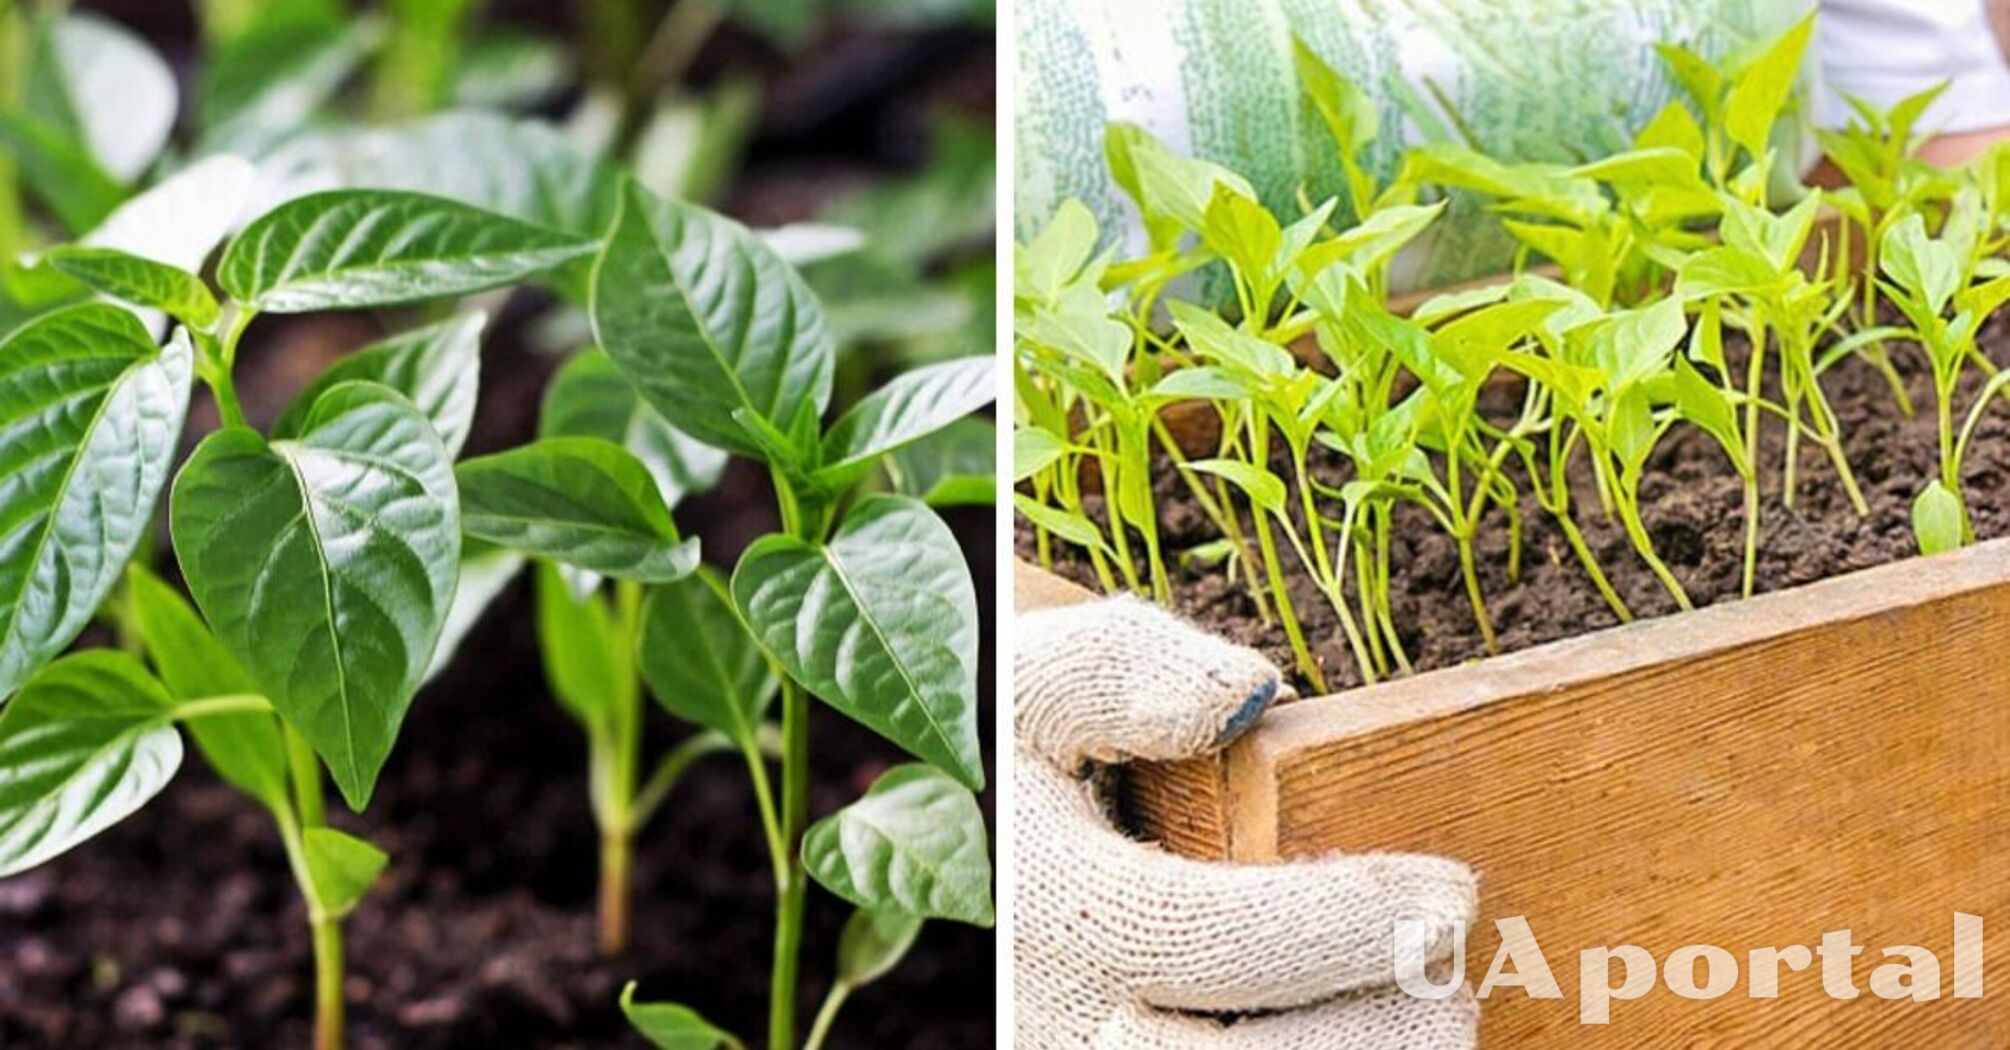 How to properly plant and care for peppers for seedlings